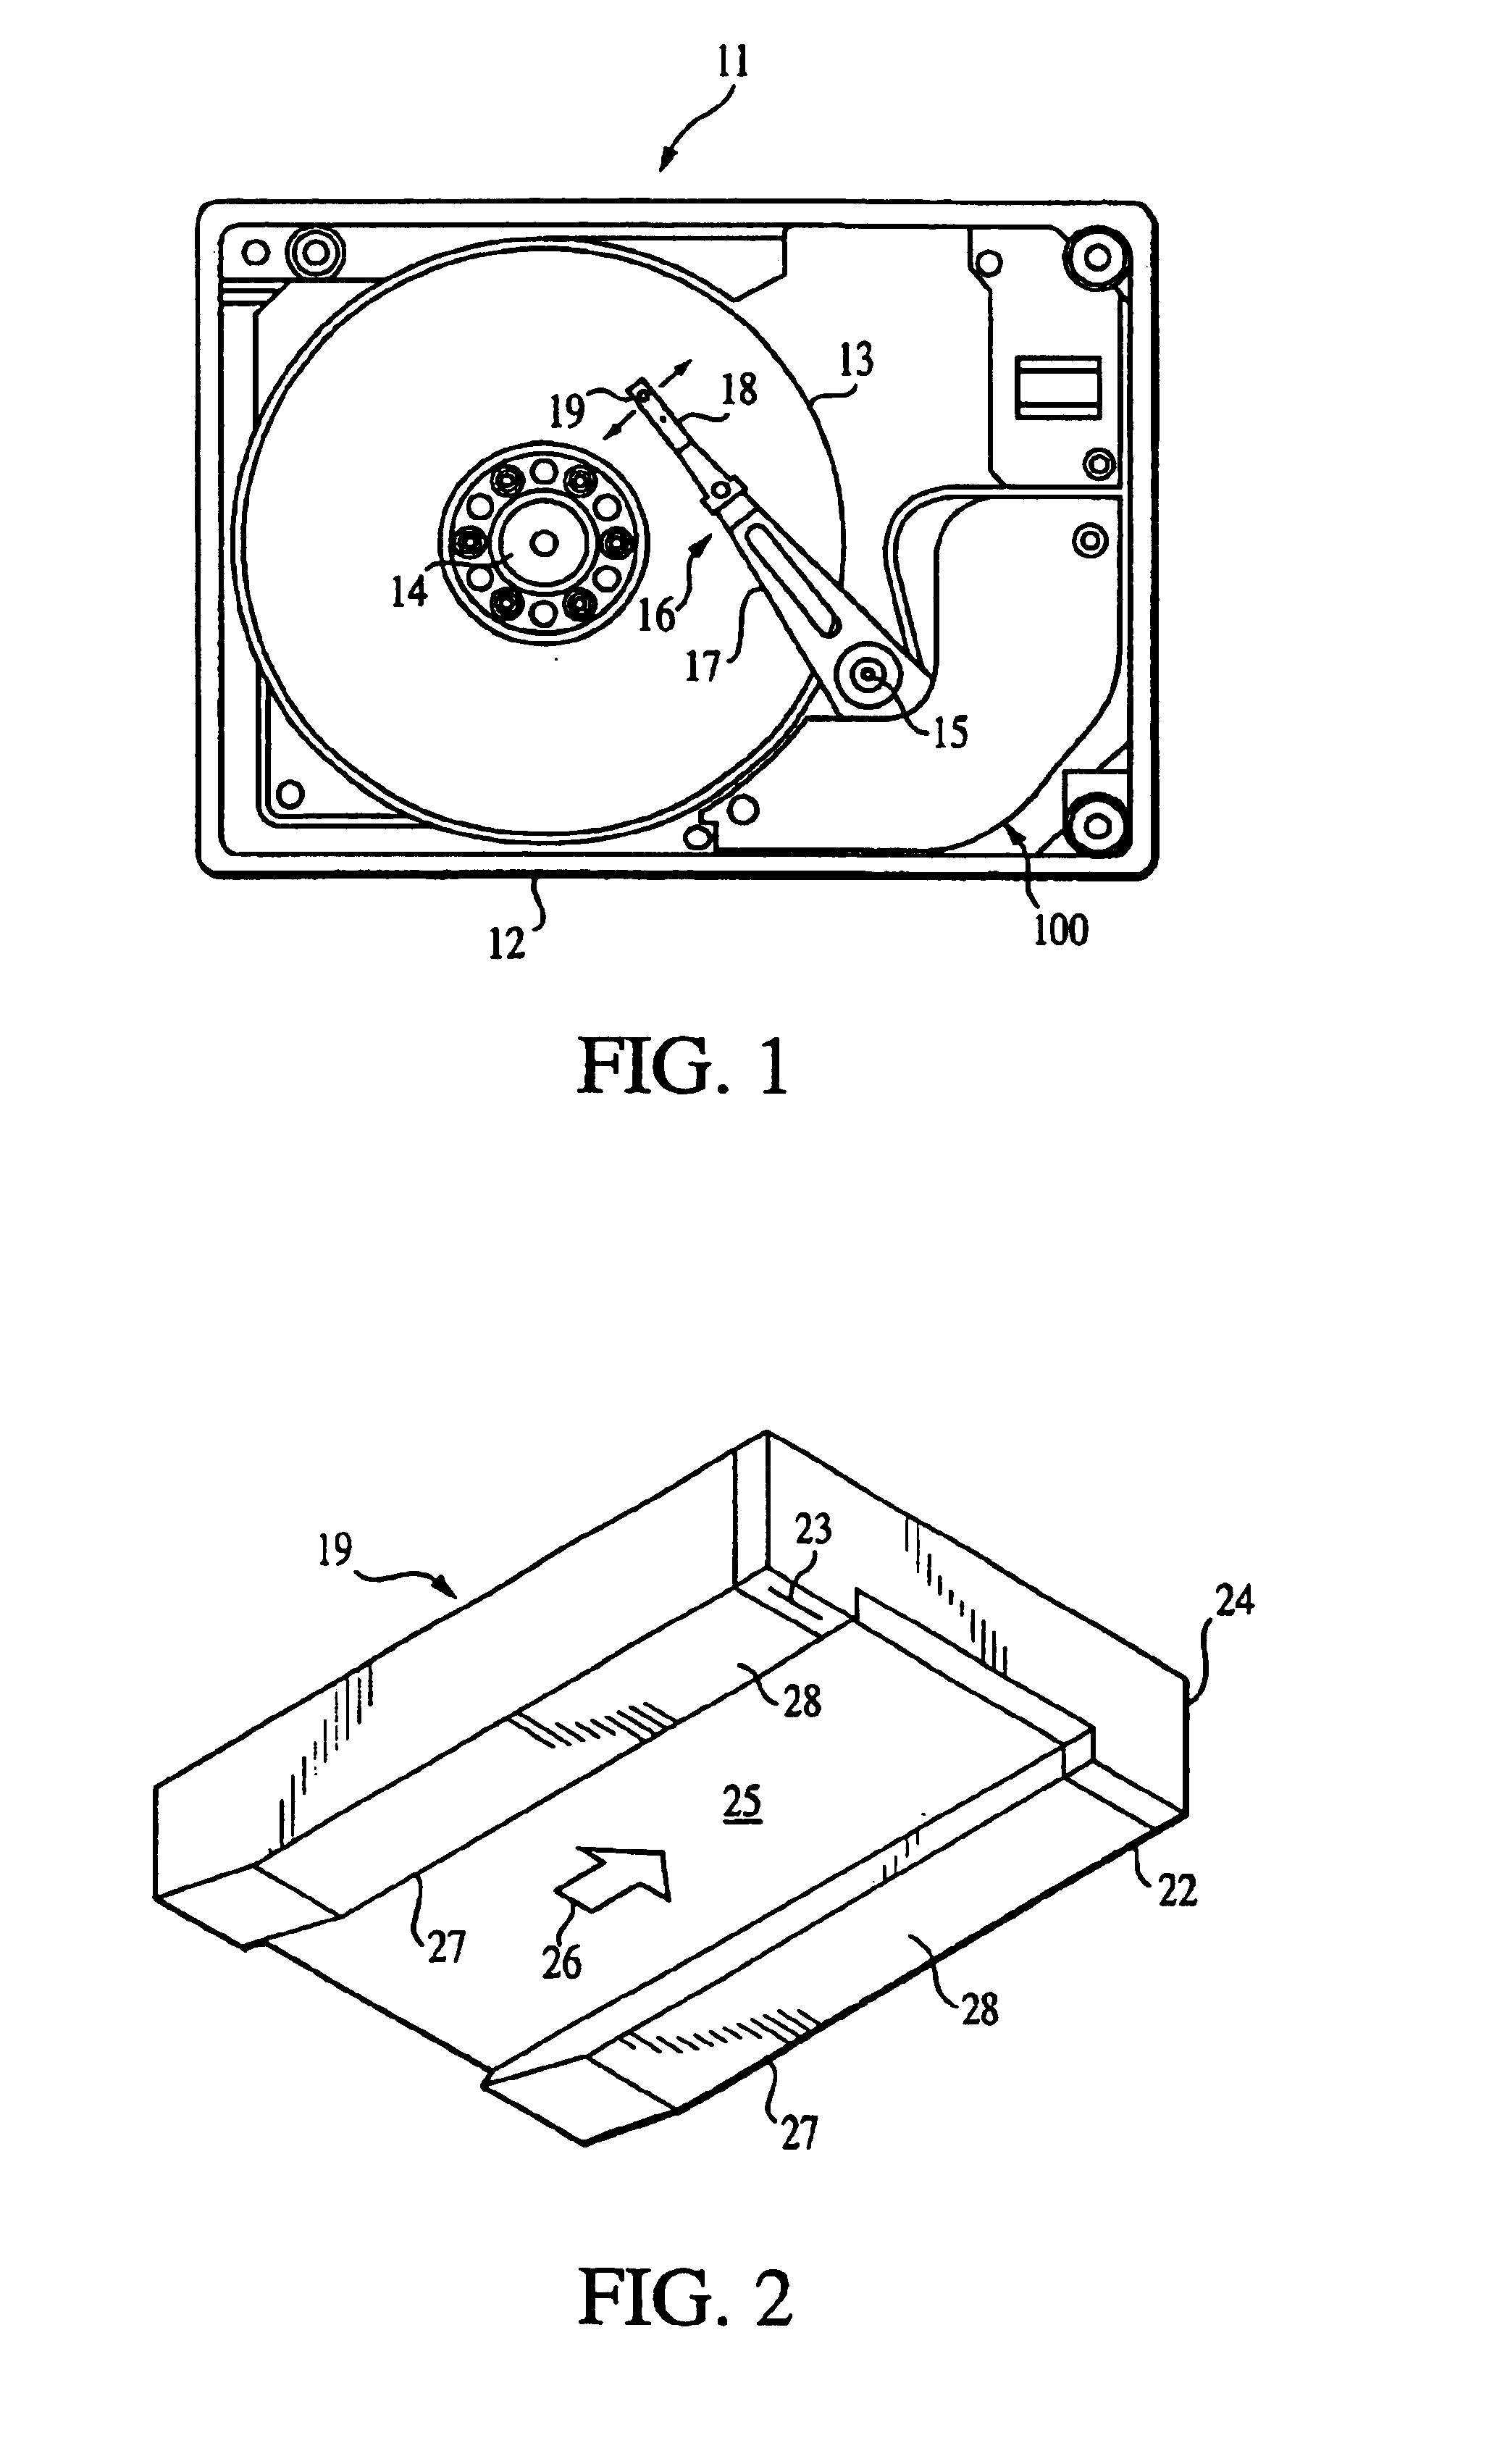 Disc drive magnetic head fine positioning mechanism including a base connecting a suspension to an arm, and having a piezoelectric drive element adjacent thereto